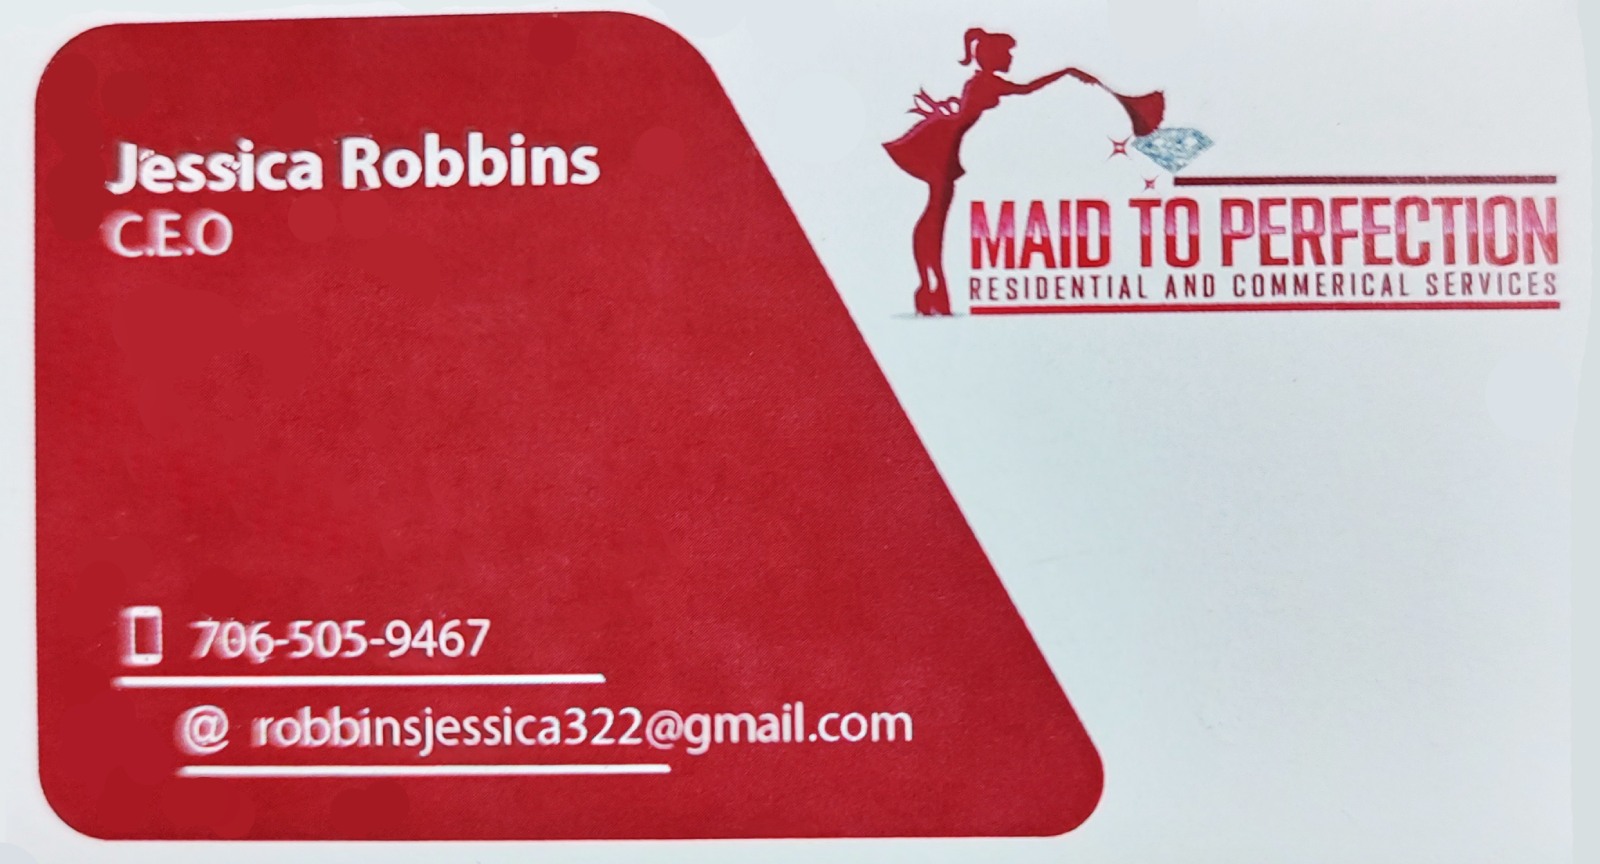 Maid to Perfection Residential and Commercial Services business card